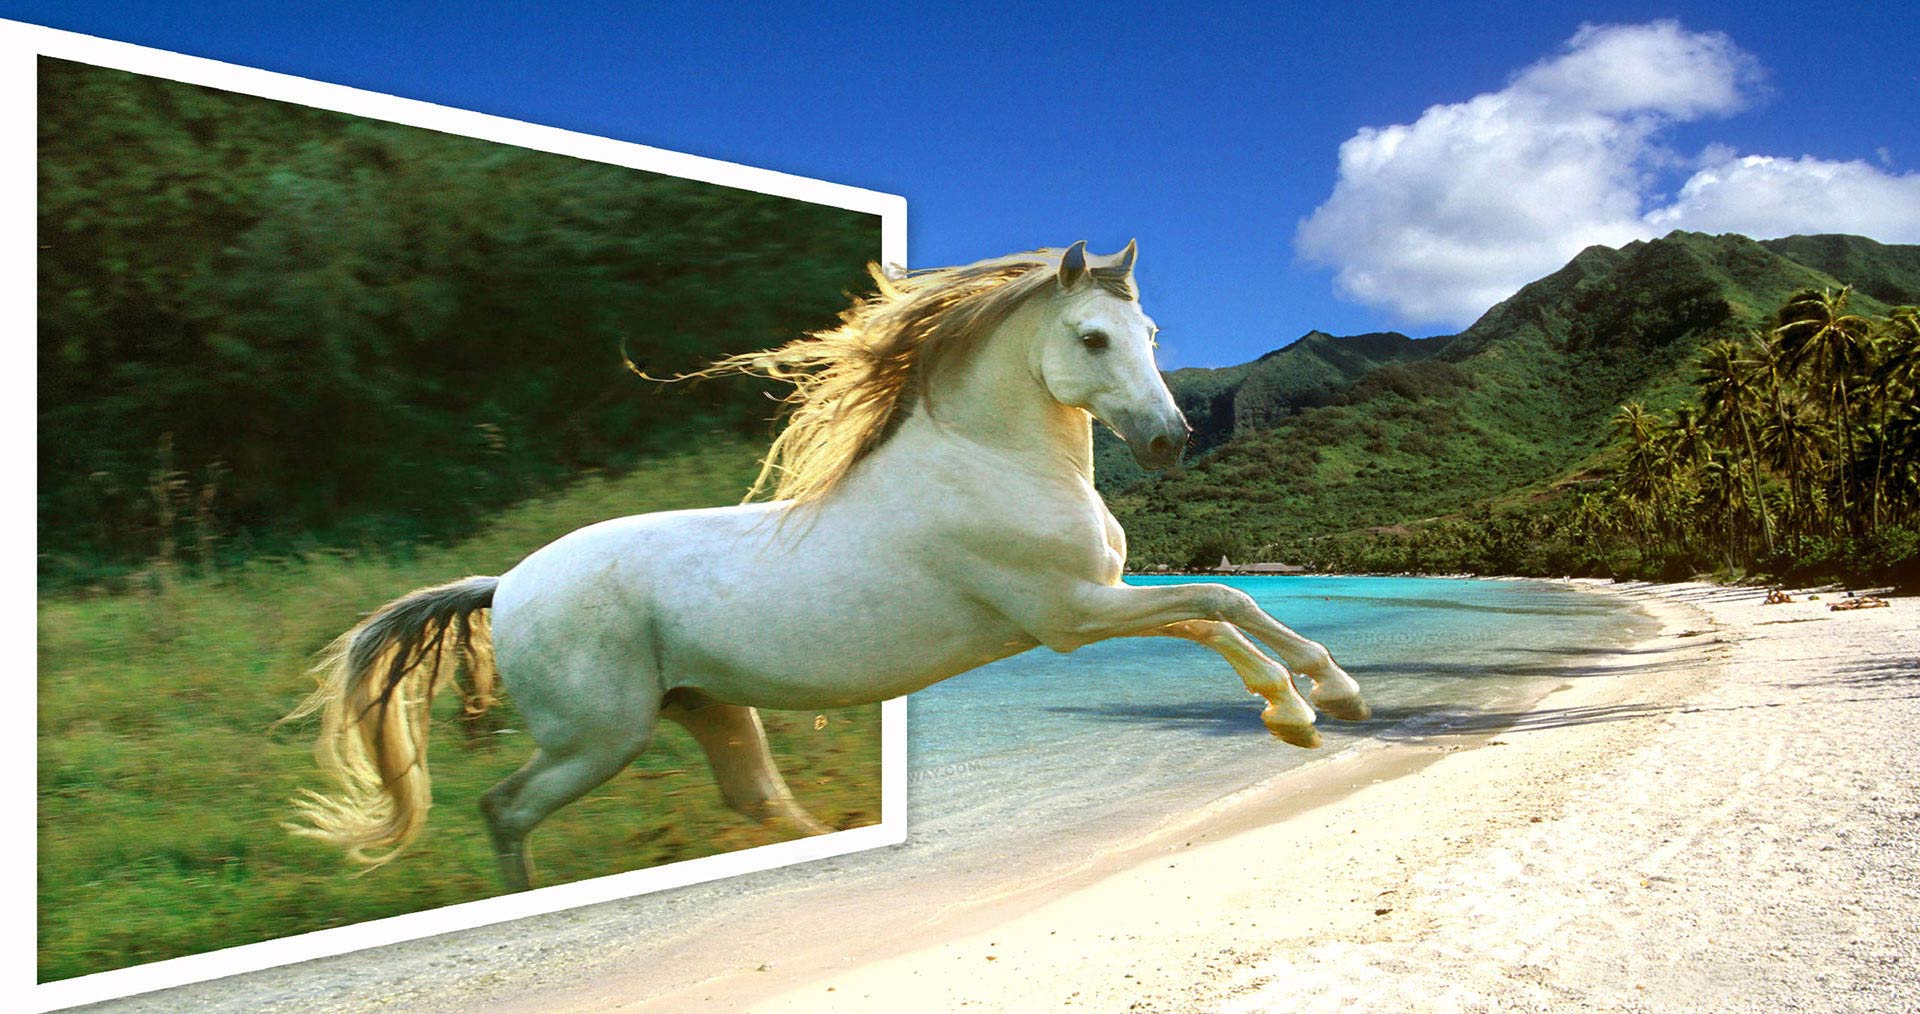  Photo-montage animalier - cheval!, by Lovely Design, Graphiste freelance